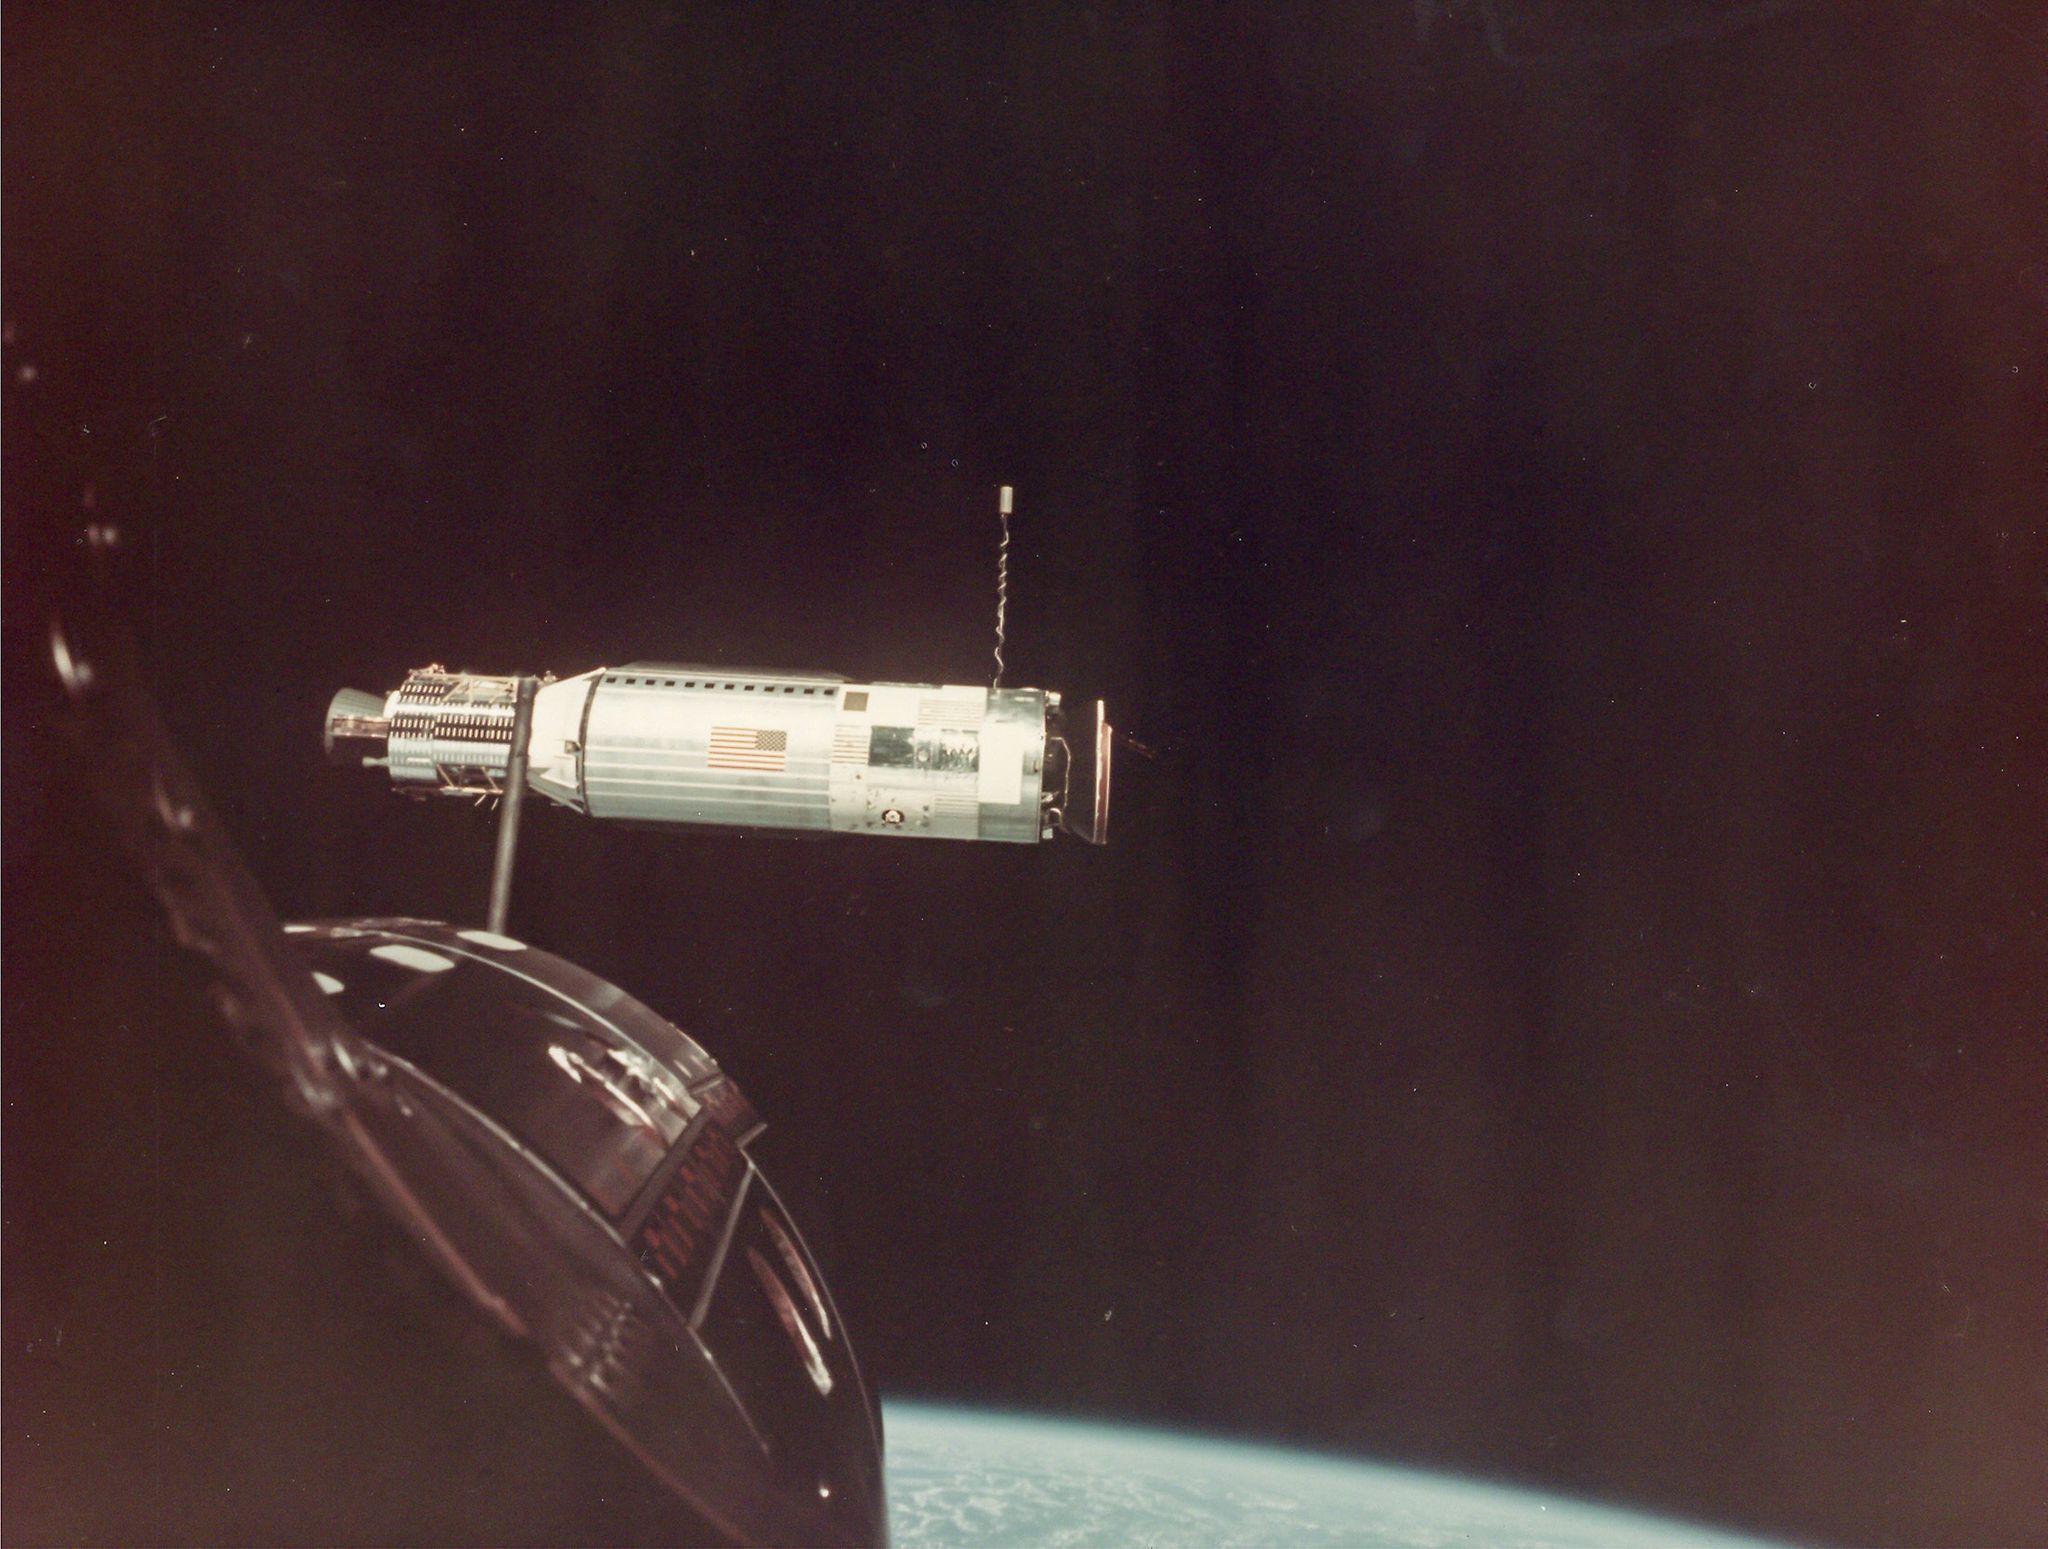 Michael Collins - Rendezvous with the Agena, Gemini 10, July 1966 Vintage chromogenic print on